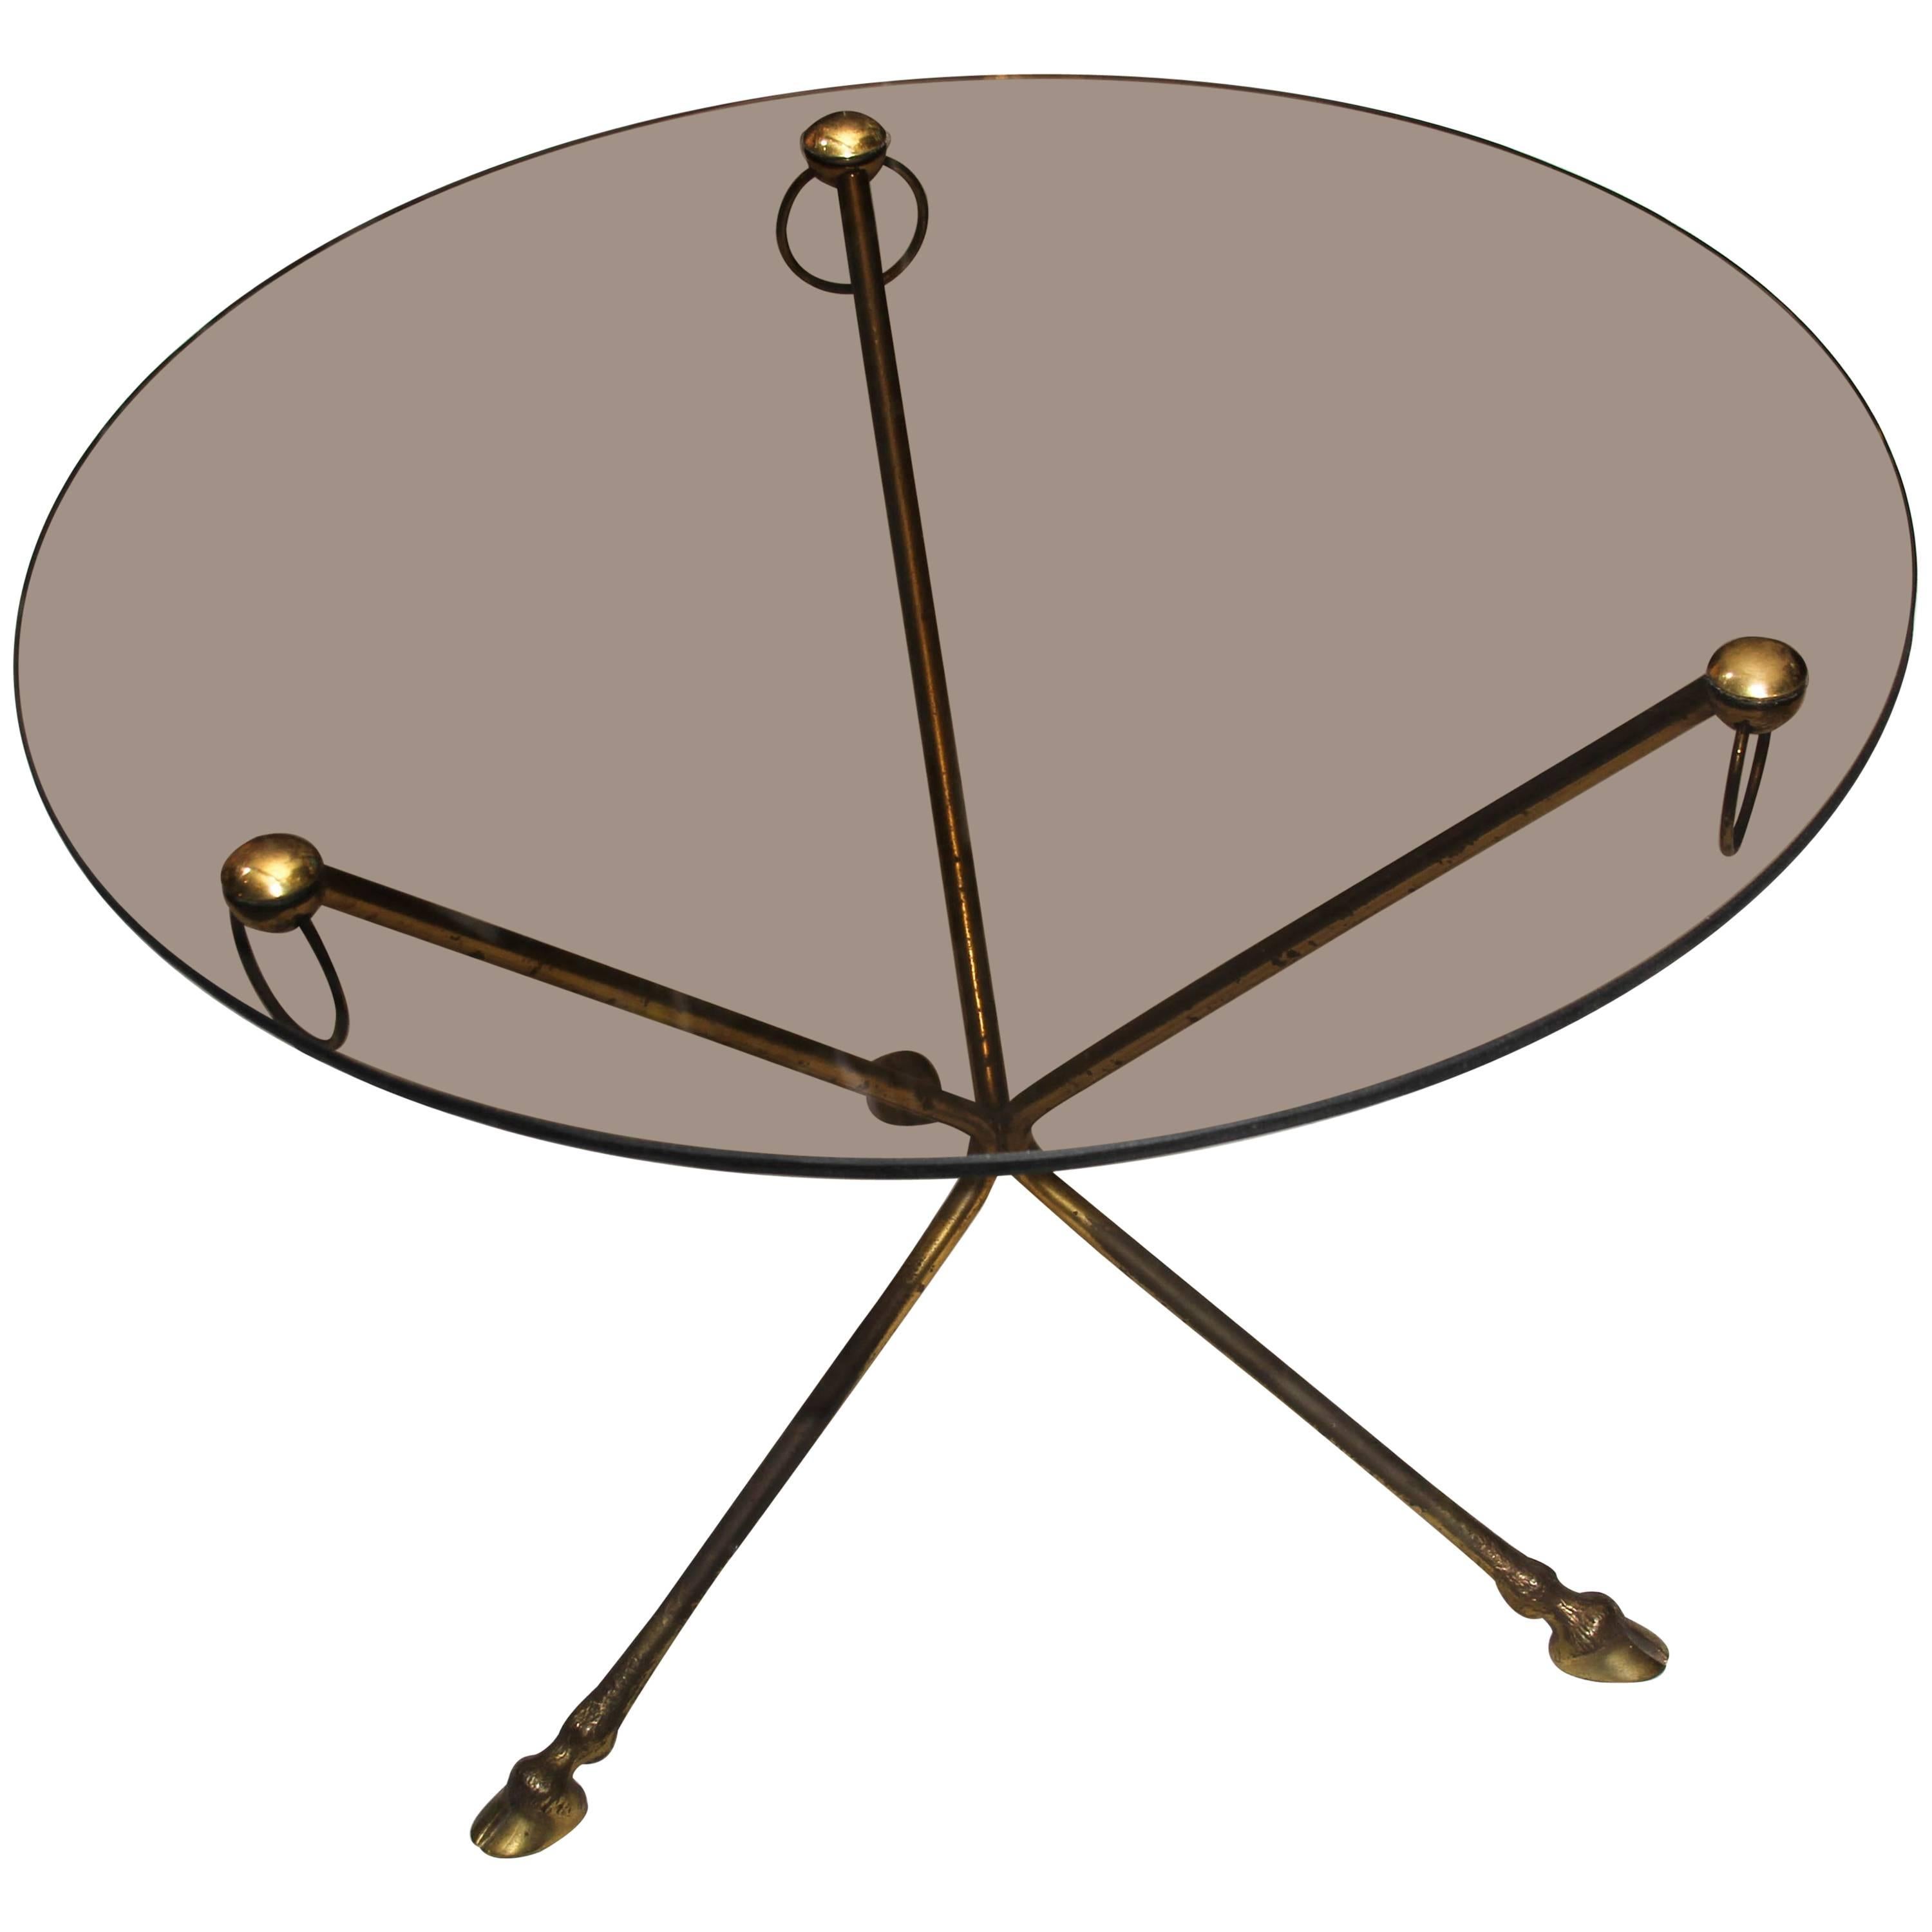 Midcentury French Glass and Brass Tripod Table with Deer-Hoof 